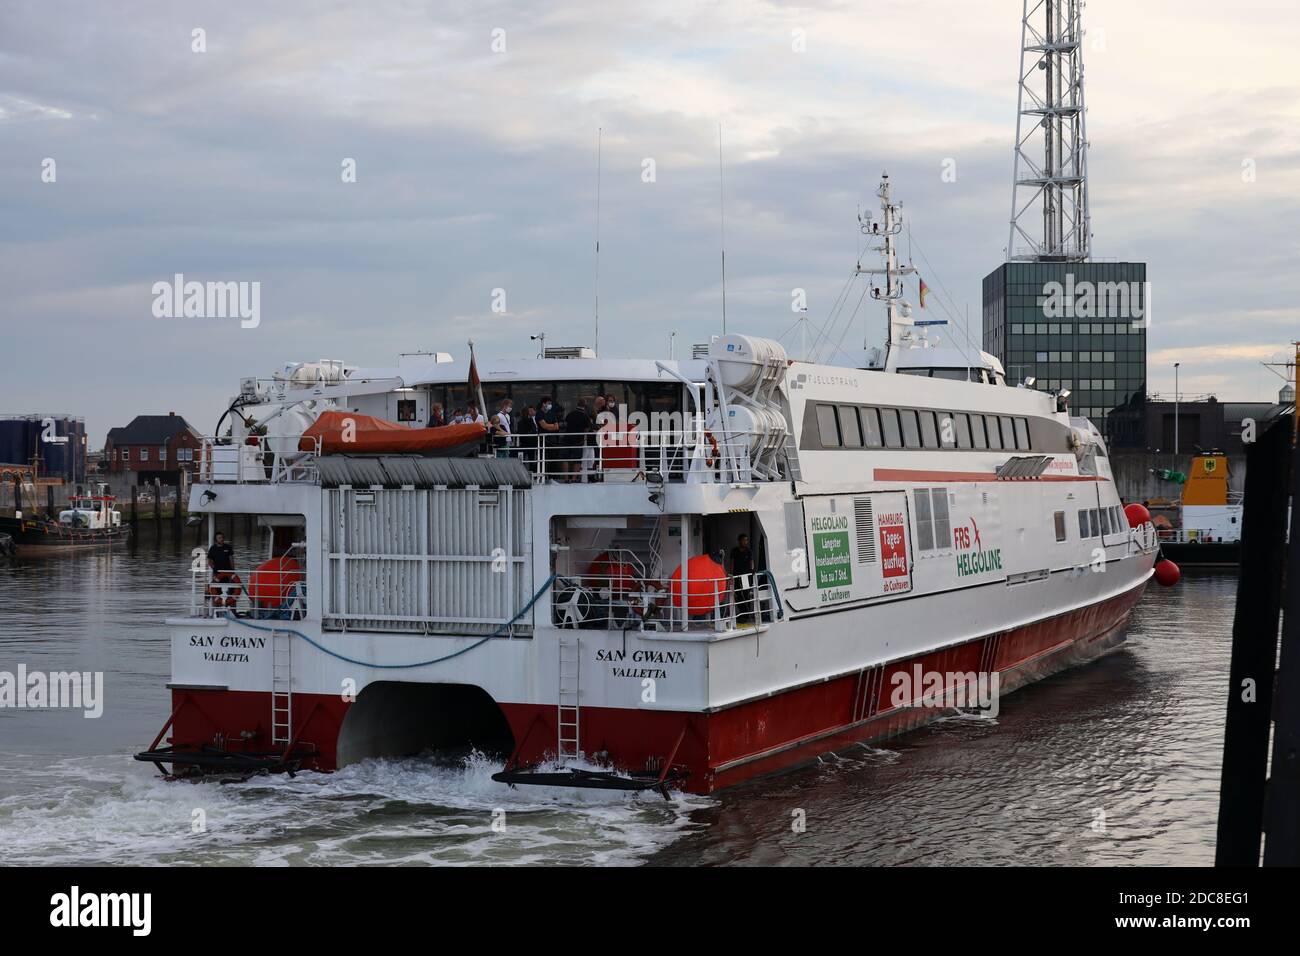 The high-speed catamaran San Gwann will reach the port of Cuxhaven in the evening on August 20, 2020. Stock Photo